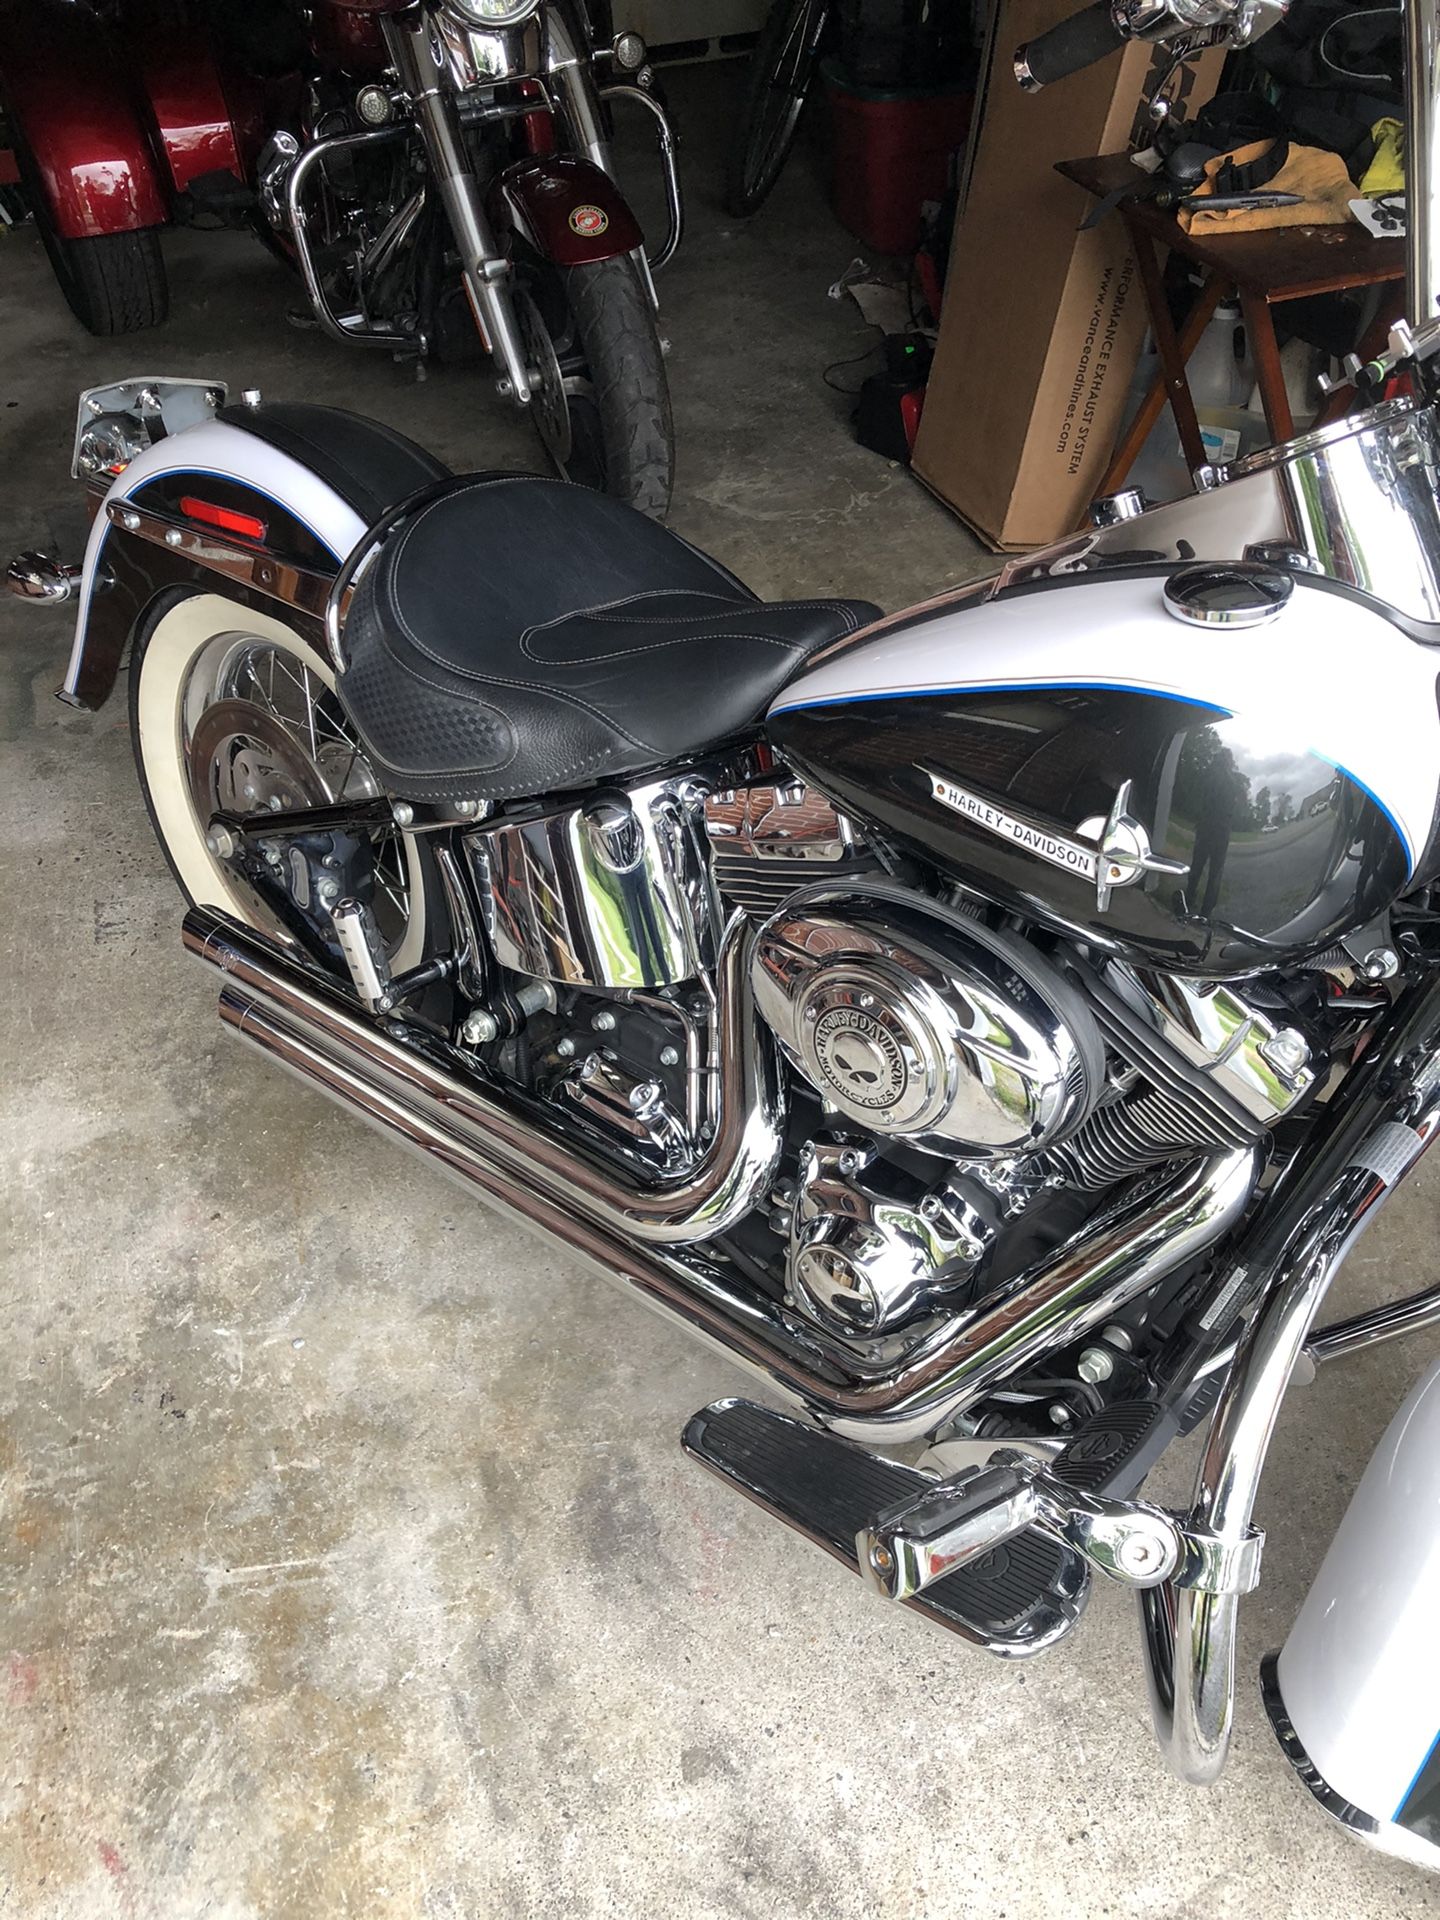 Vance&Hines Staggered BigShots for 08 to 12 HD Softail deluxe